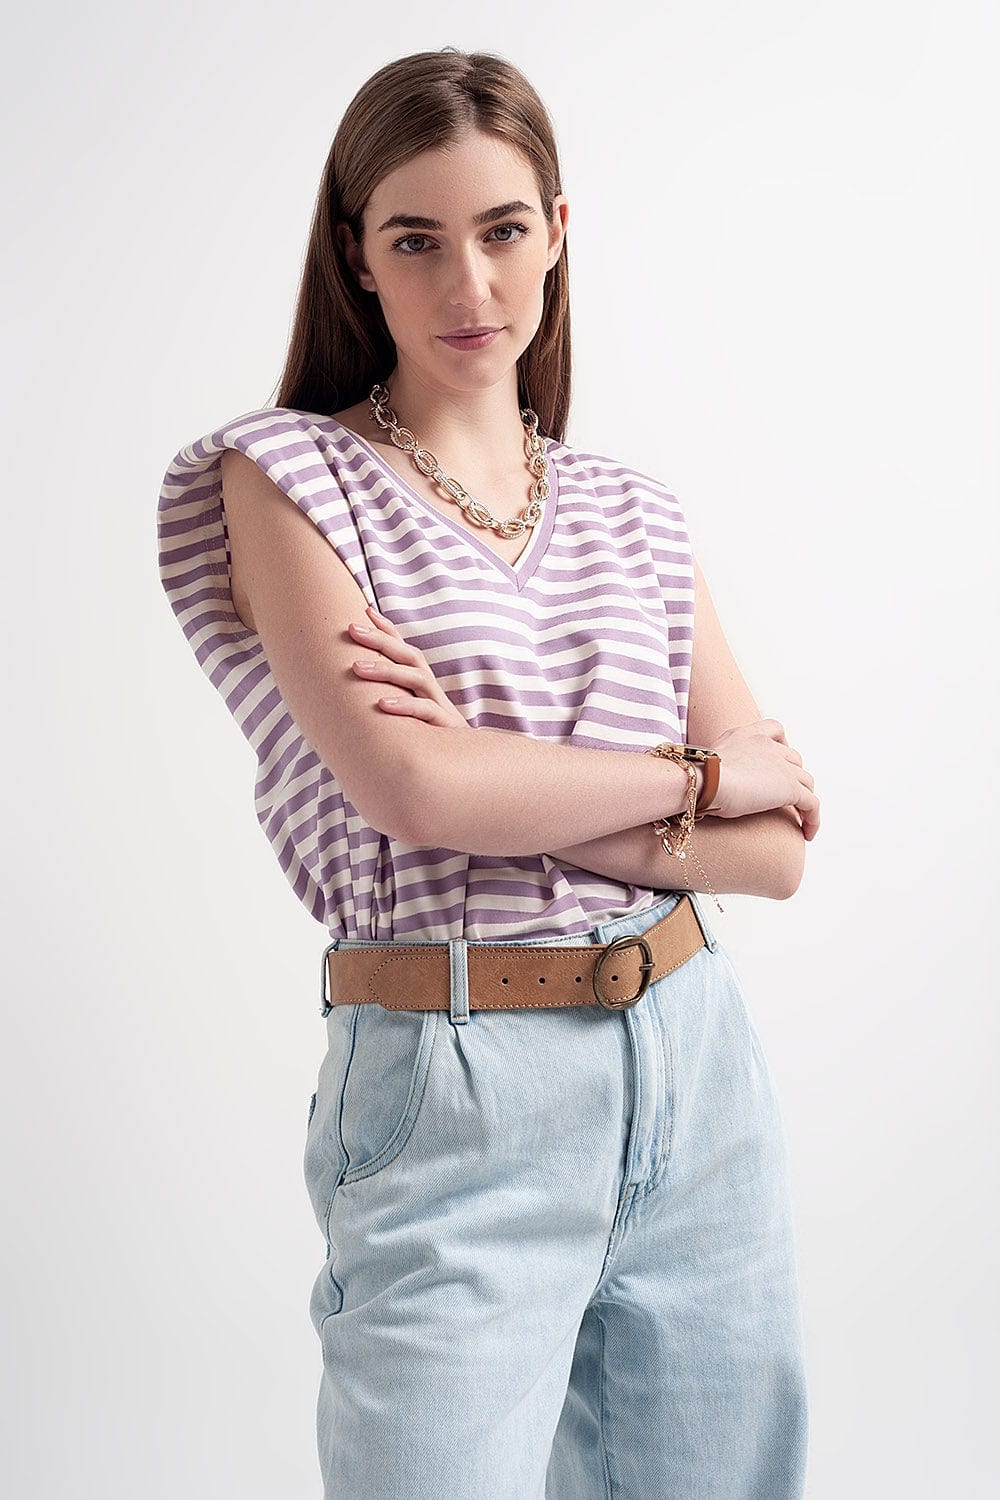 Q2 Tops sleeveless t-shirt with shoulder pad in purple stripe